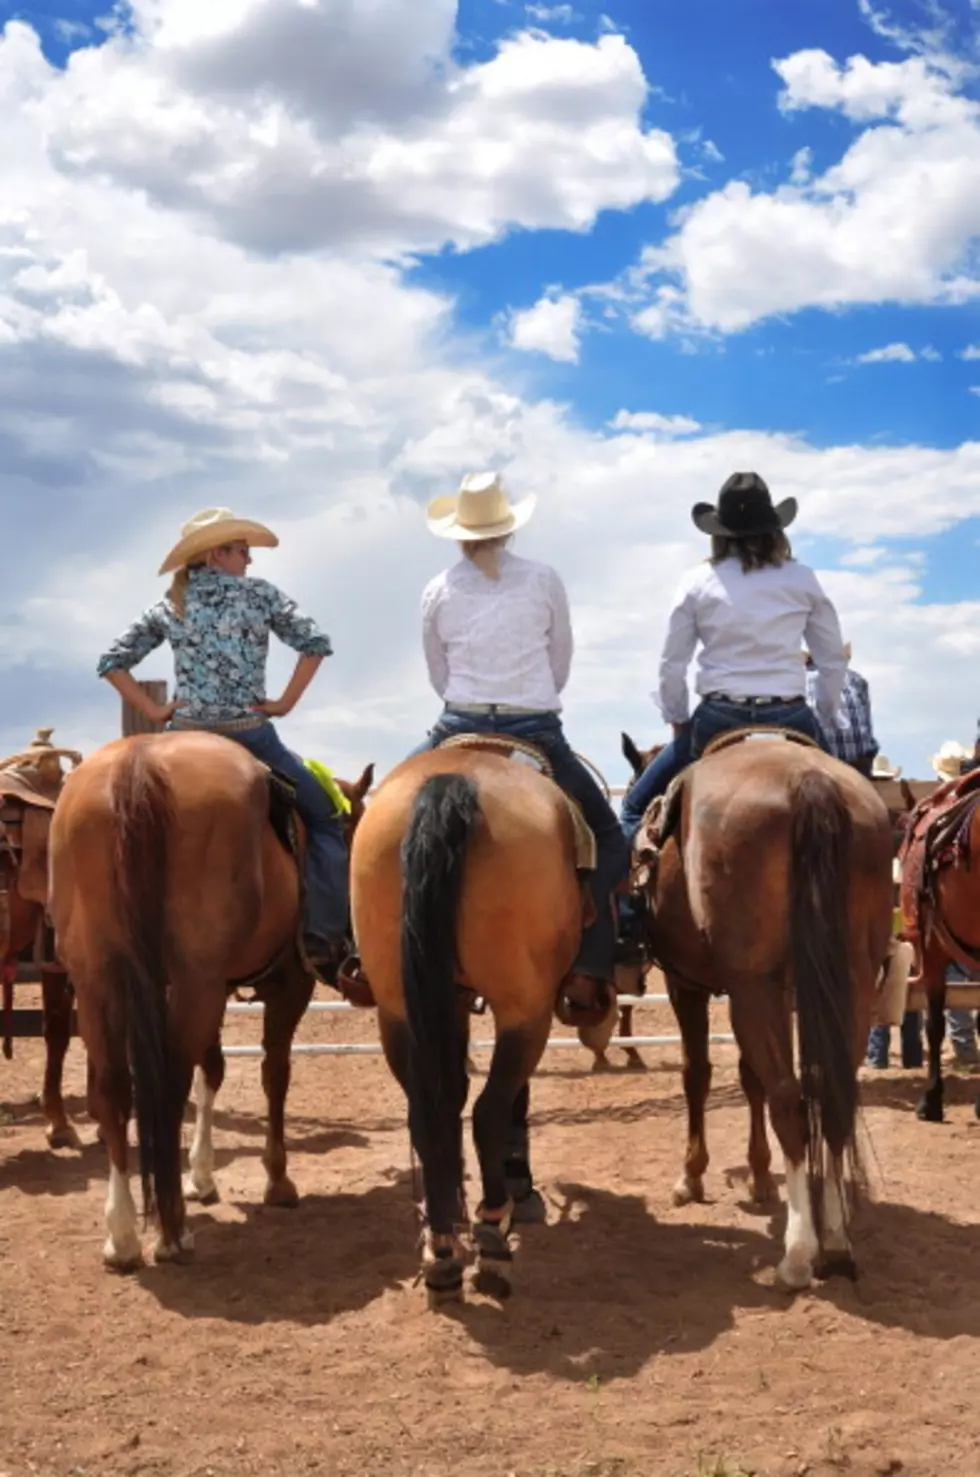 Today Is The Cowgirls Of The West Museum &#038; Emporium&#8217;s Grand Opening